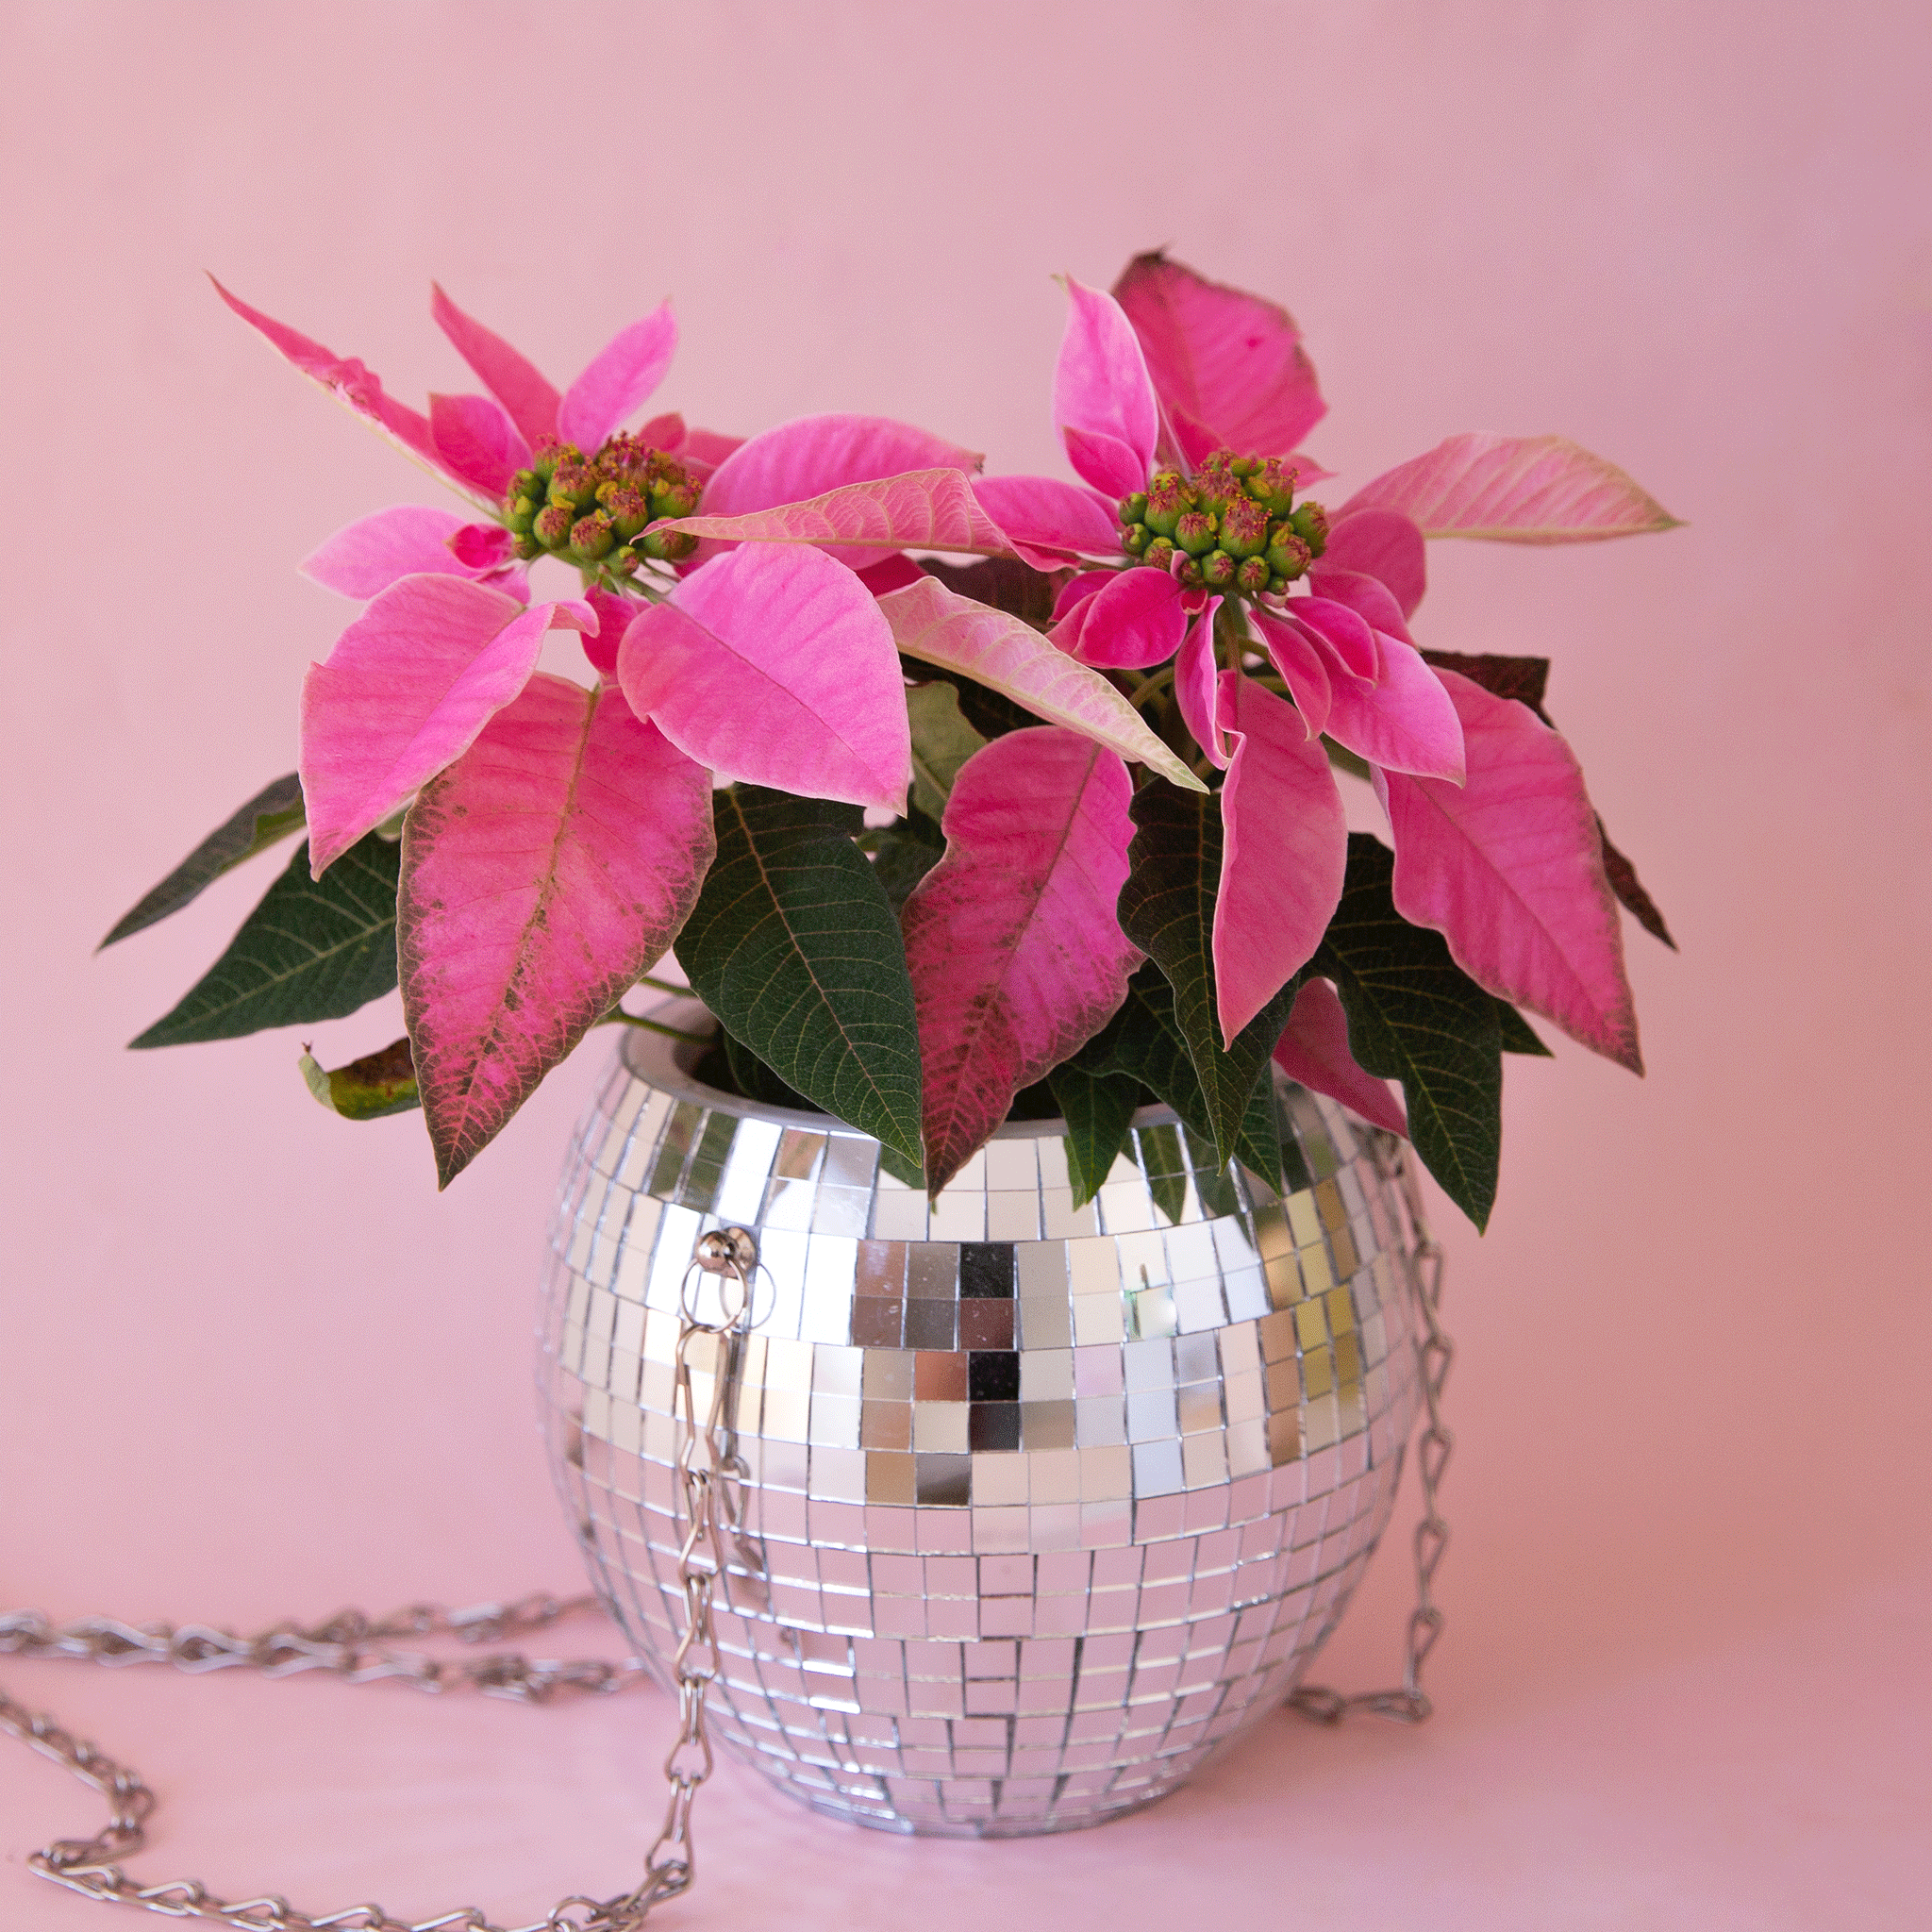 On a light pink background is a silver hanging planter with a pink poinsettia plant in it. 